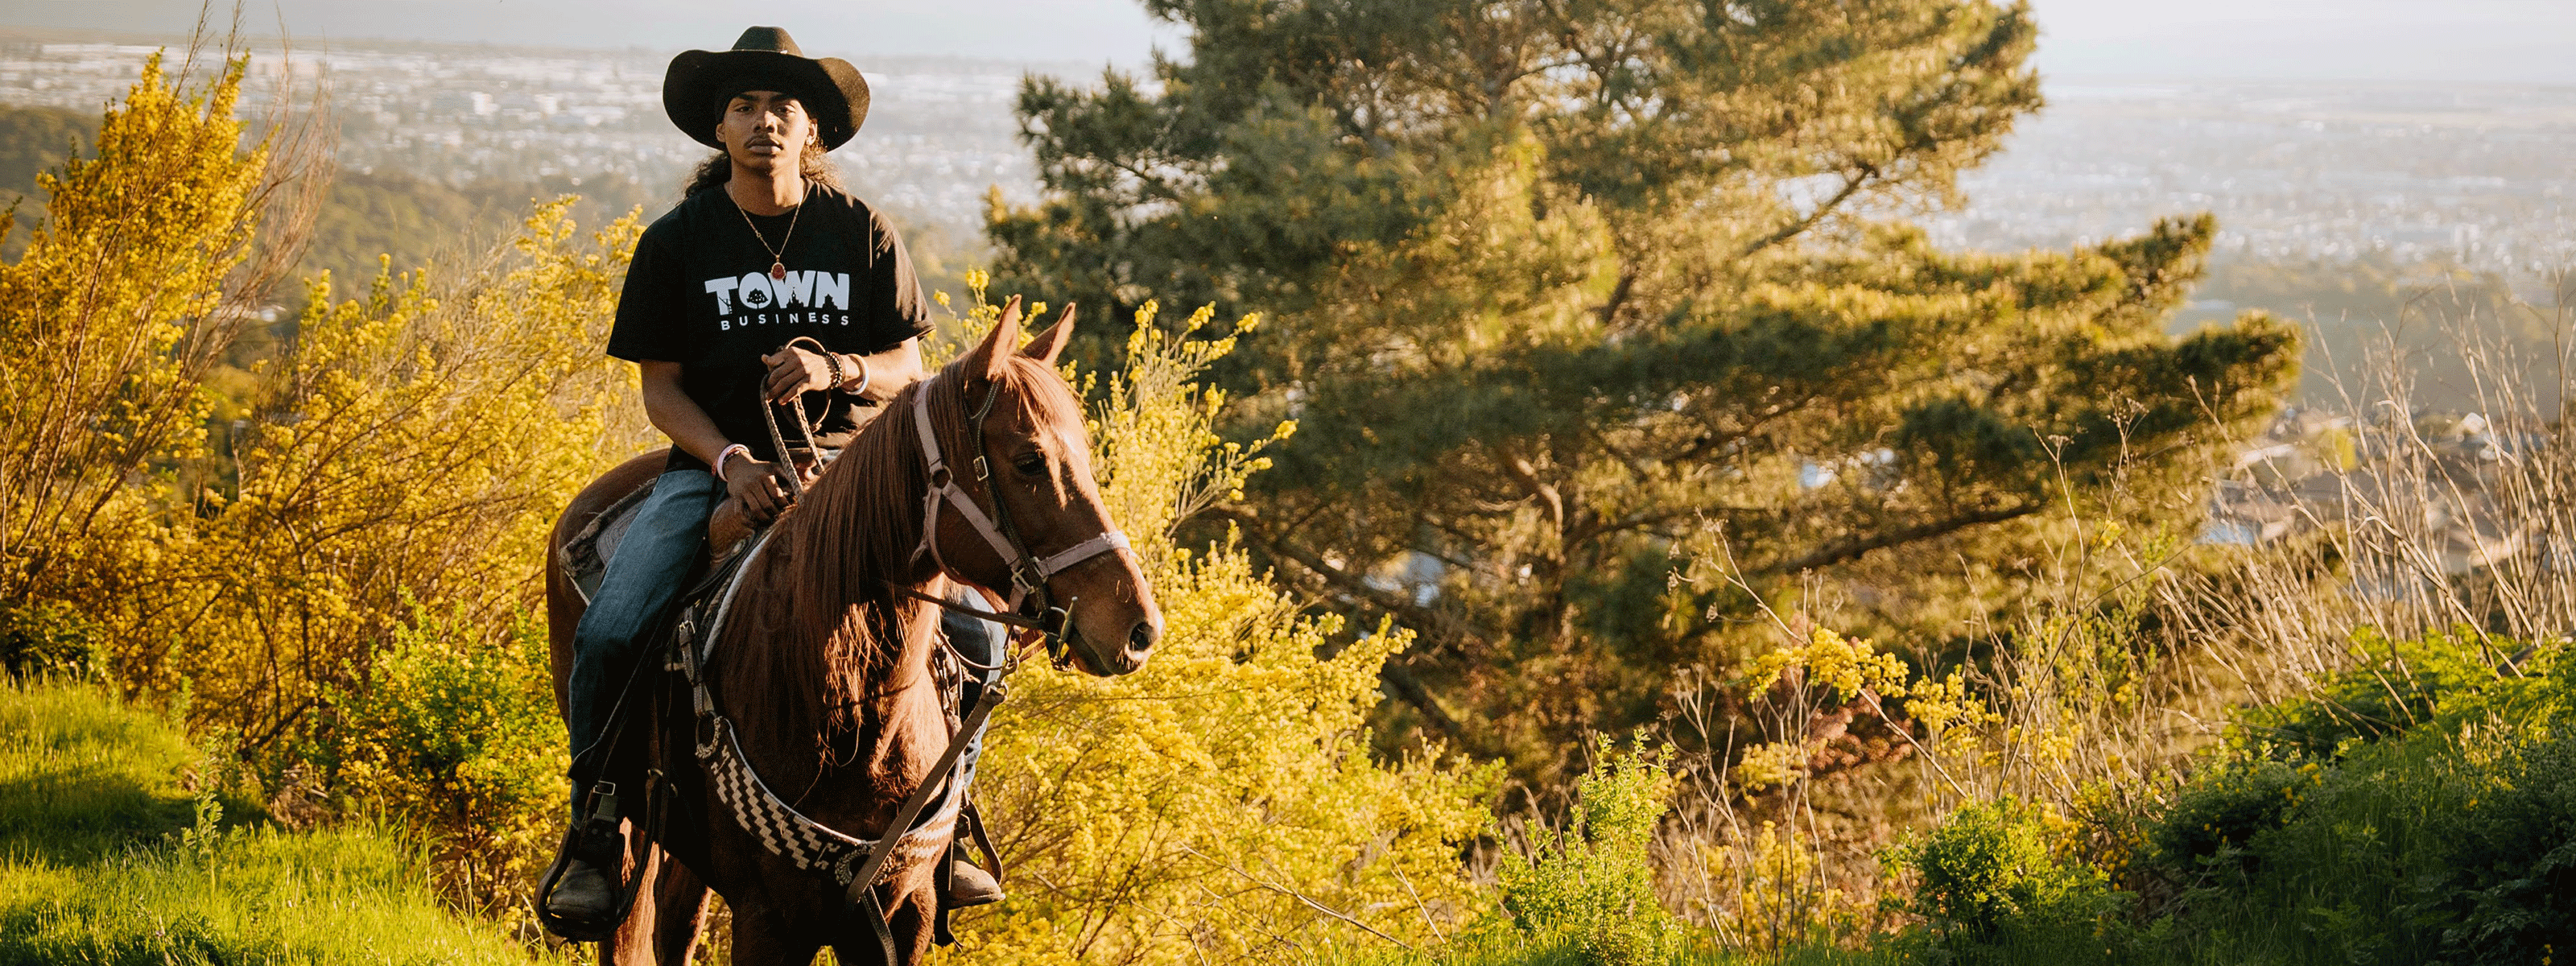 Man with a hat on horse on hill, with the city of Oakland in the background.